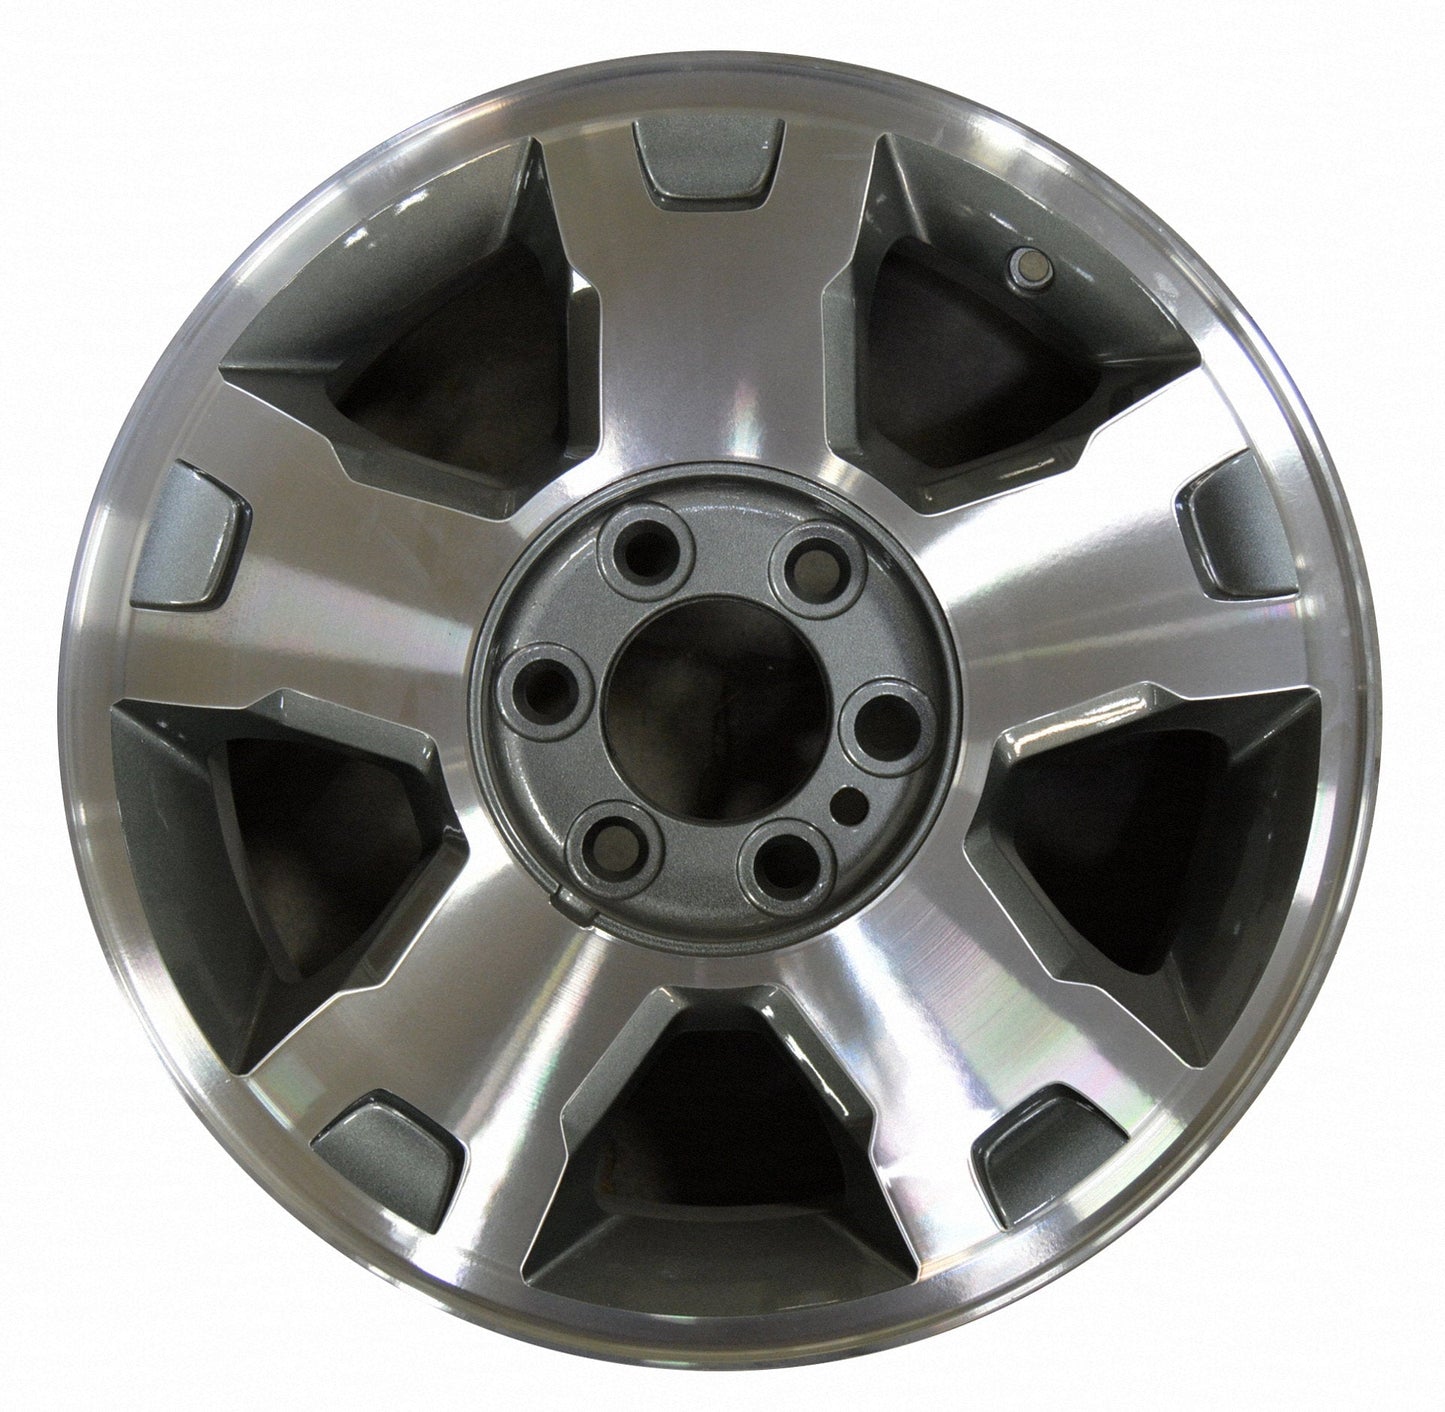 Ford F150 Truck  2009, 2010 Factory OEM Car Wheel Size 18x7.5 Alloy WAO.3779.LC29.MA